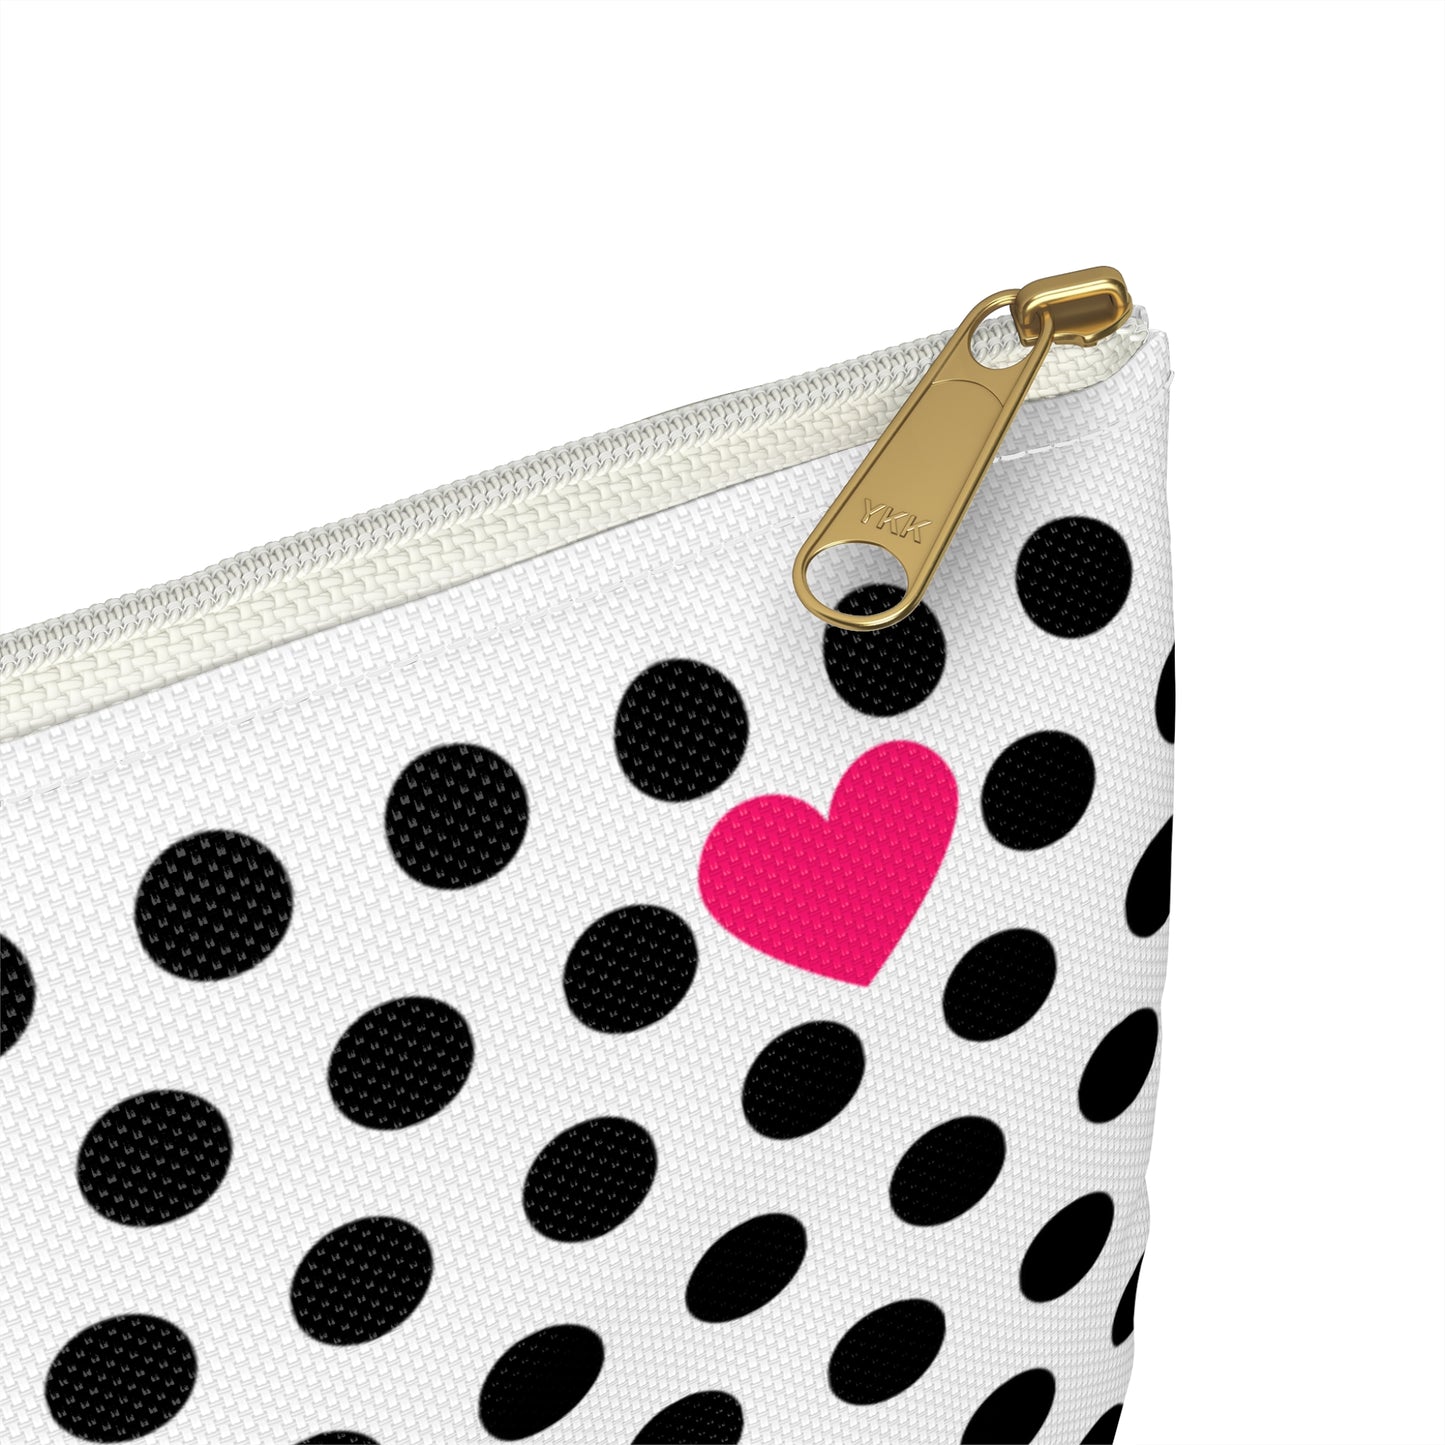 a black and white polka dot bag with a pink heart on it